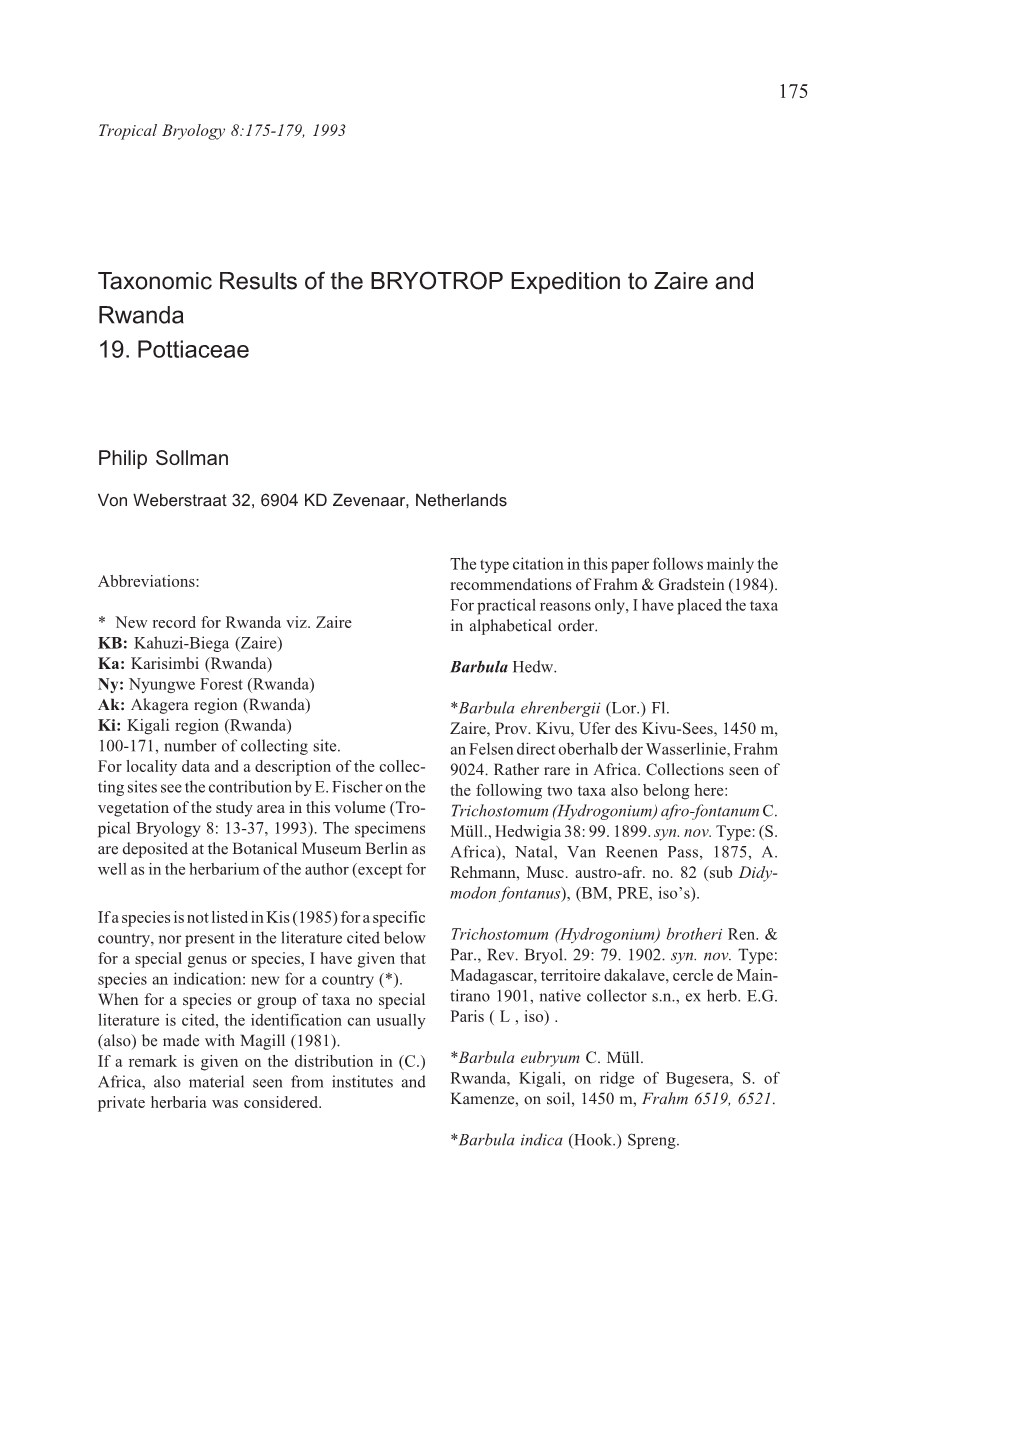 Taxonomic Results of the BRYOTROP Expedition to Zaire and Rwanda 19